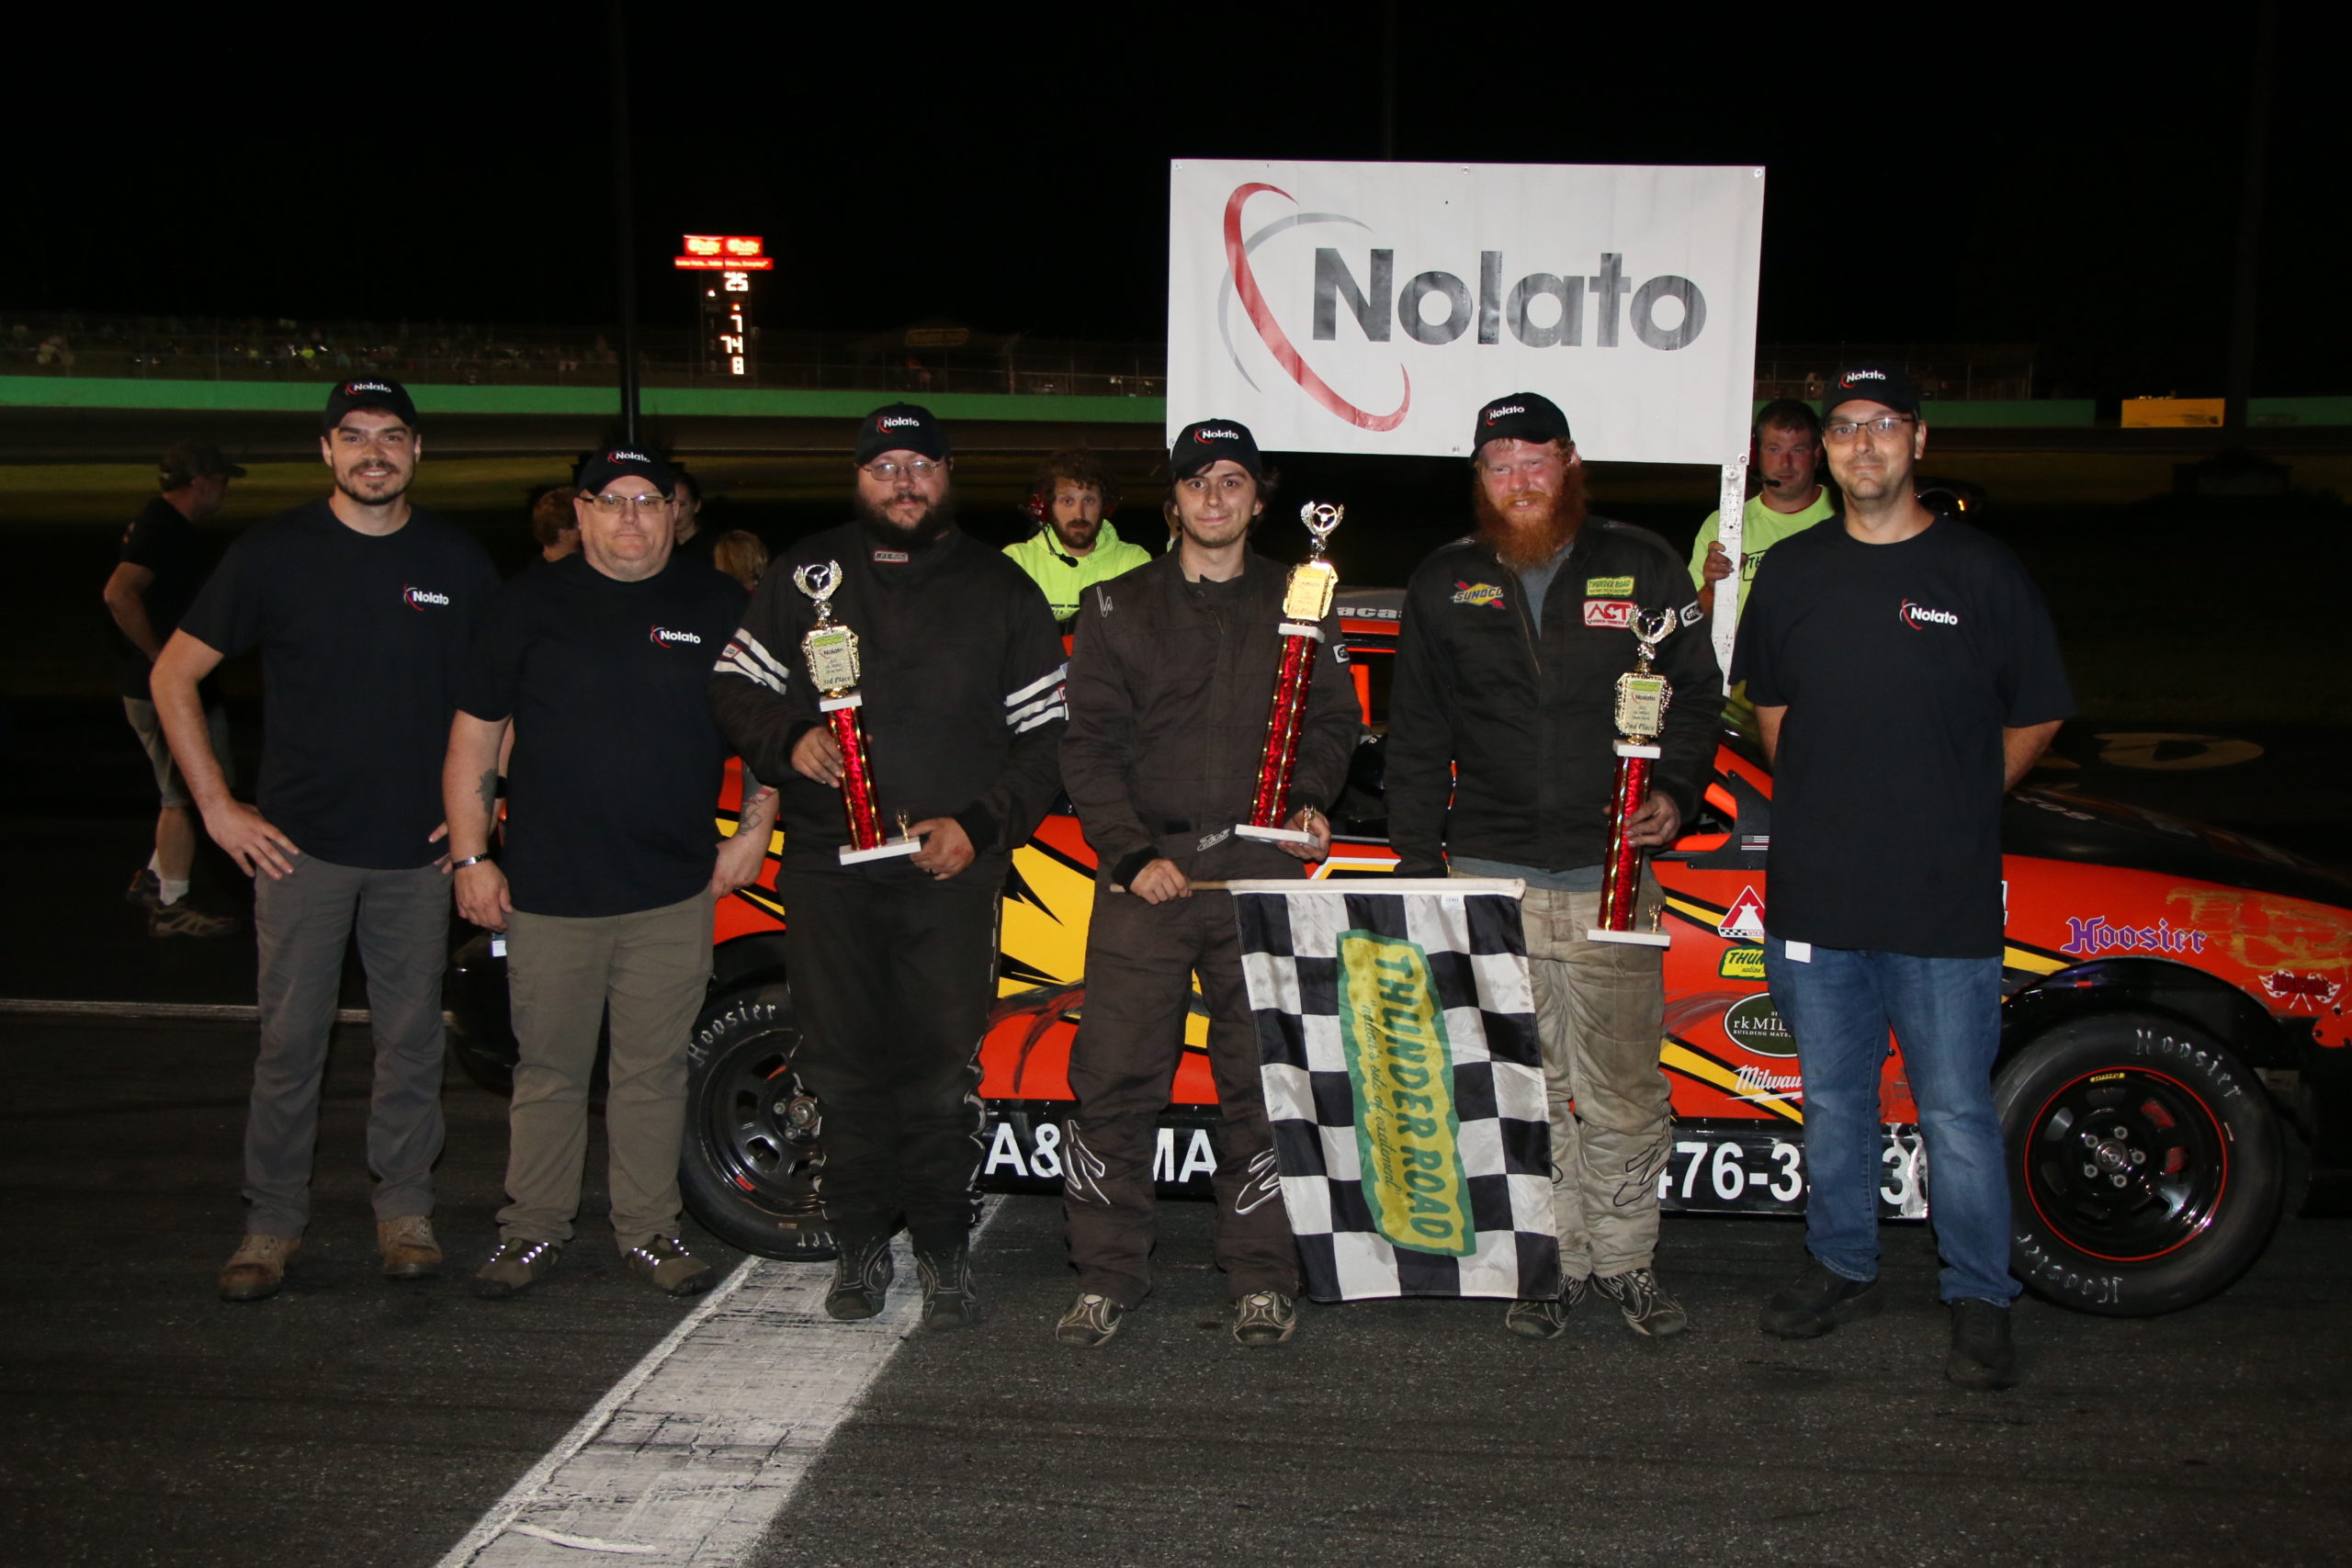 First Time Winner Taylor Sayers Takes Nolato Road Warrior Challenge (VT)